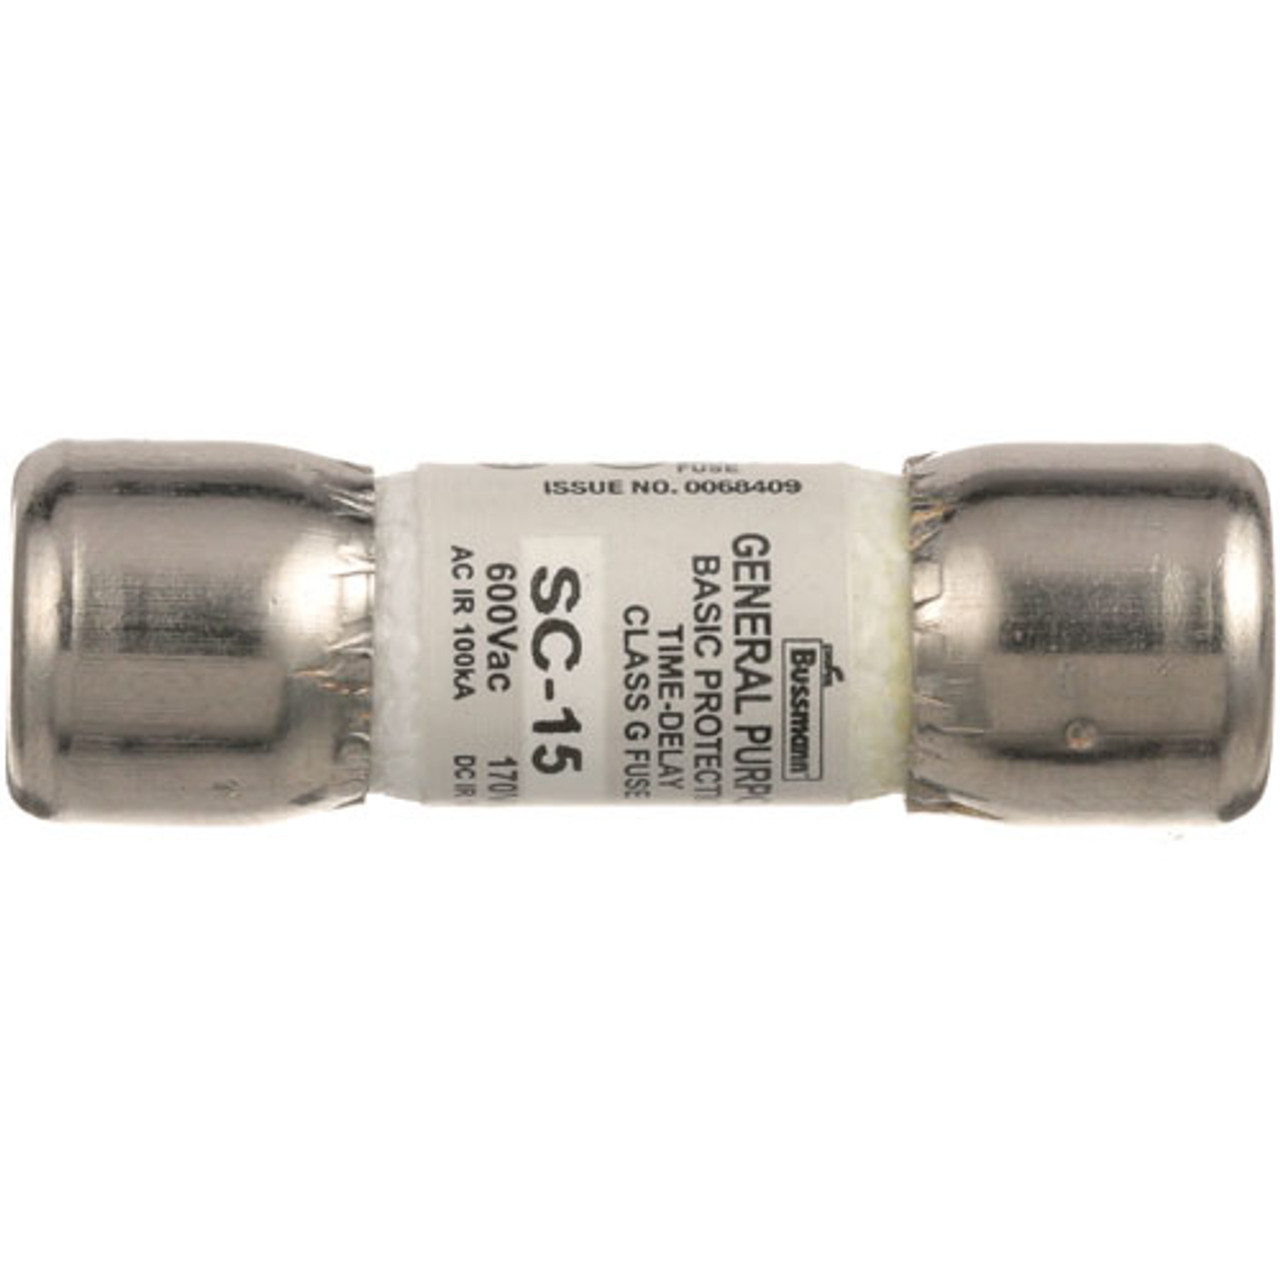 Fuse - Replacement Part For Vulcan Hart FE019-40